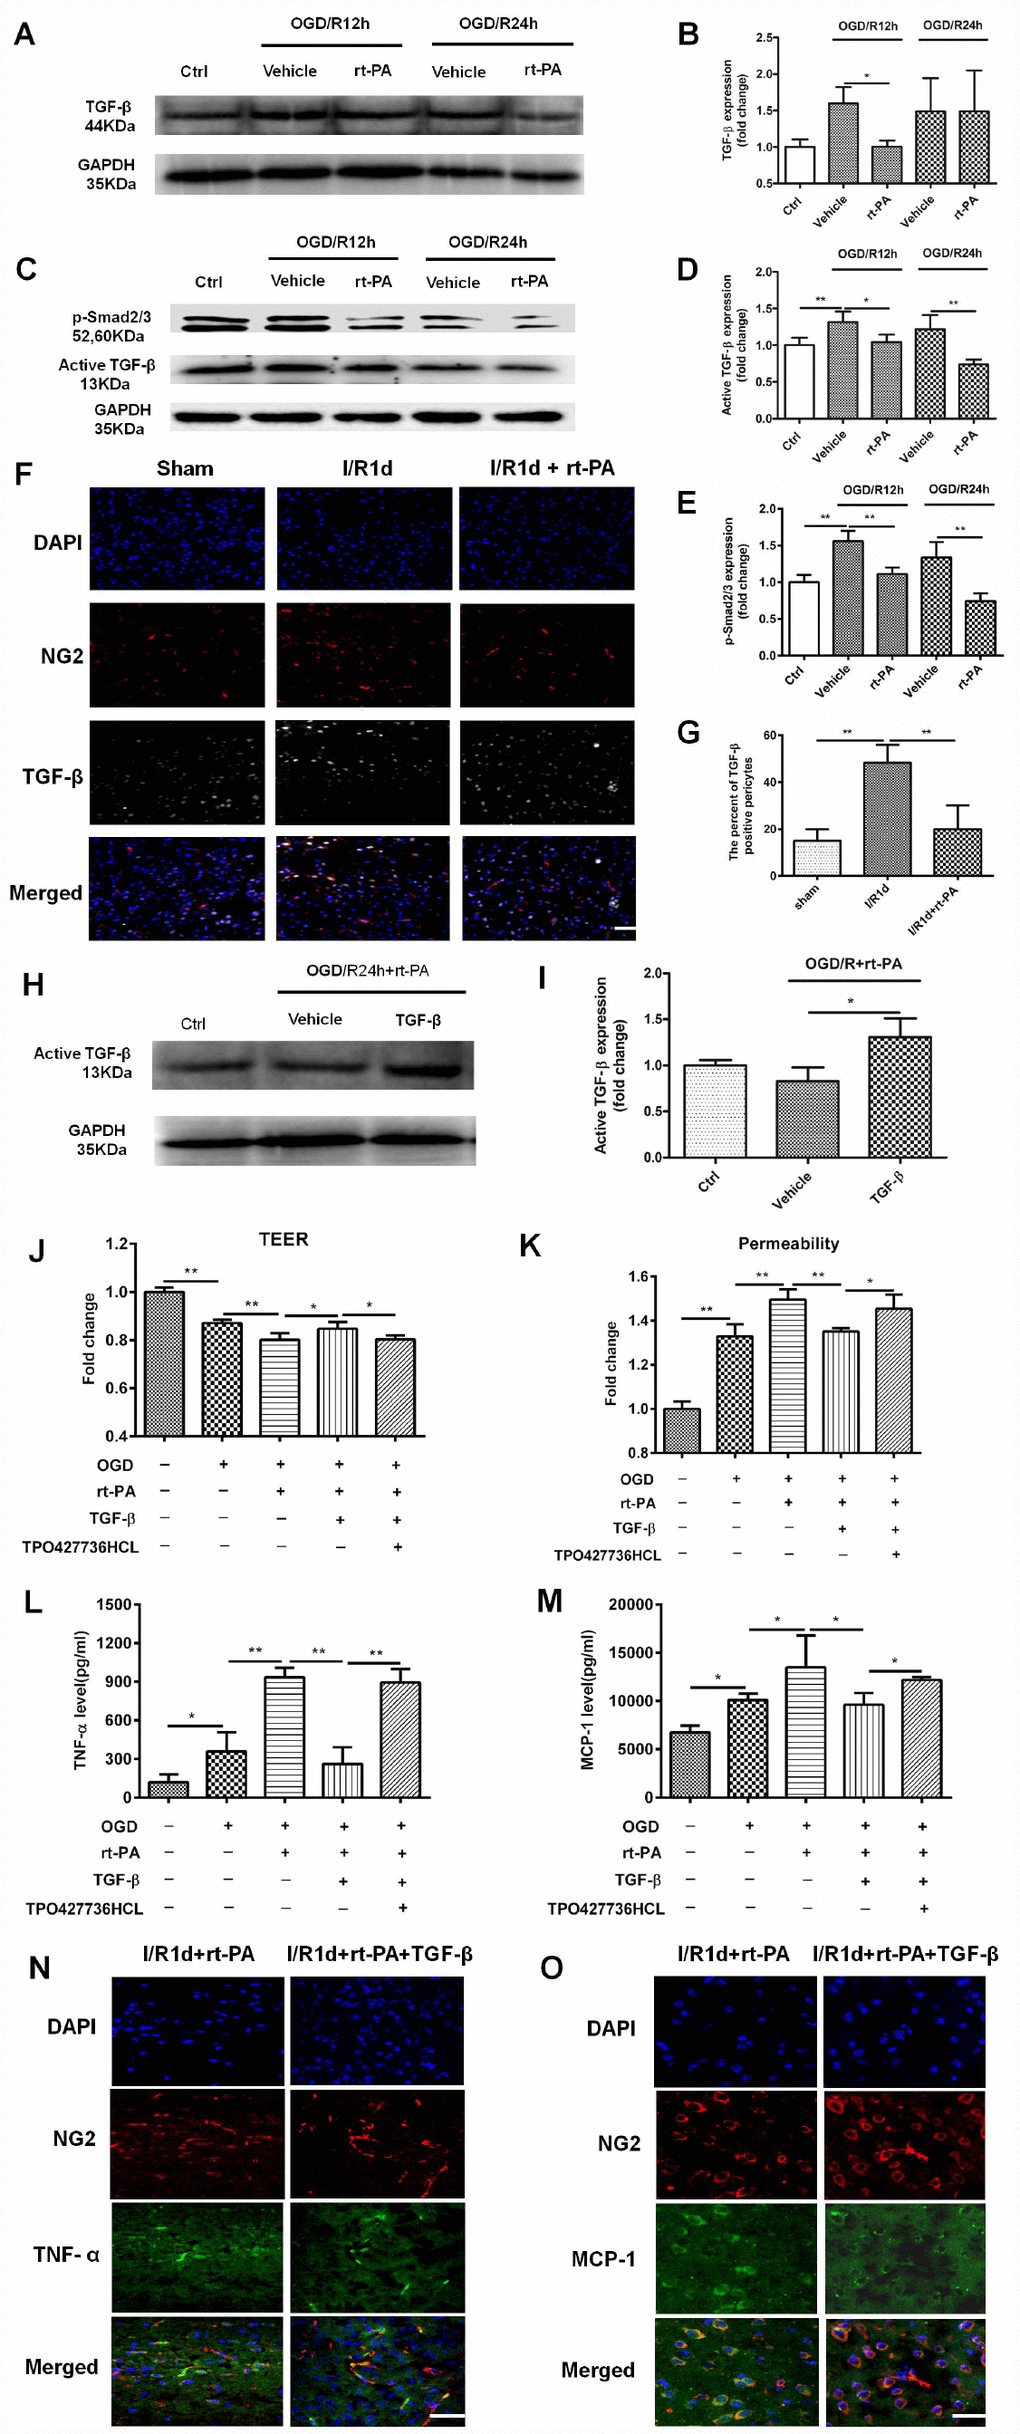 The TGF-β/p-Smad2/3 pathway mediated the disruption of the BBB after rt-PA treatment. (A–E) Representative western blot showing the expression of total TGF-β (44 kDa), active TGF-β (13 kDa) and p-Smad2/3 at 12 h and 24 h after treatment with or without 50 μg/ml rt-PA after OGD for 4 h. Densitometric analysis of the levels of total TGF-β (44 kDa), active TGF-β (13 kDa) and p-Smad2/3 protein at 12 h and 24 h after treatment with or without rt-PA after OGD for 4 h; n = 3 for each group. Data represent the mean ± sd, *p p F, G) Immunofluorescence was used to detect the expression of TGF-β on pericytes in the sham-treated mice and mice 1 d after I/R treatment with or without 9 mg/kg rt-PA; scale bar: 50 μm; n = 3 for each group. Data represent the mean ± sd, *p p H, I) Representative western blot showing the expression of active TGF-β (13 kDa) after treatment with TGF-β in combination with rt-PA or rt-PA alone after OGD for 4 h. Densitometric analysis of the level of active TGF-β (13 kDa) after treatment with TGF-β in combination with rt-PA or rt-PA alone after OGD for 4 h; n = 3 for each group. Data represent the mean ± sd, *p p J, K) The TEER and permeability of the coculture model were determined after OGD/R alone or OGD/R in combination with 50 μg/ml rt-PA, 3 ng/ml TGF-β or 200 nM TPO427736 HCL treatment; n = 3–5 for each group. Data represent the mean ± sd, *p p L, M) The concentrations of TNF-α and MCP-1 secreted from pericytes alone or treated with 50 μg/ml rt-PA, 3 ng/ml TGF-β or 200 nM TPO427736 HCL were determined 24 h after OGD/R; n = 3–4 for each group. Data represent the mean ± sd, *p p N, O) Immunofluorescence was used to detect the expression of TNF-α and MCP-1 after 1 d of treatment with 10 μg/kg TGF-β in combination with 9 mg/kg rt-PA after I/R. The results also showed that TGF-β decreased the colocalization of TNF-α and MCP-1 (green) with NG2 (red) compared with rt-PA alone.